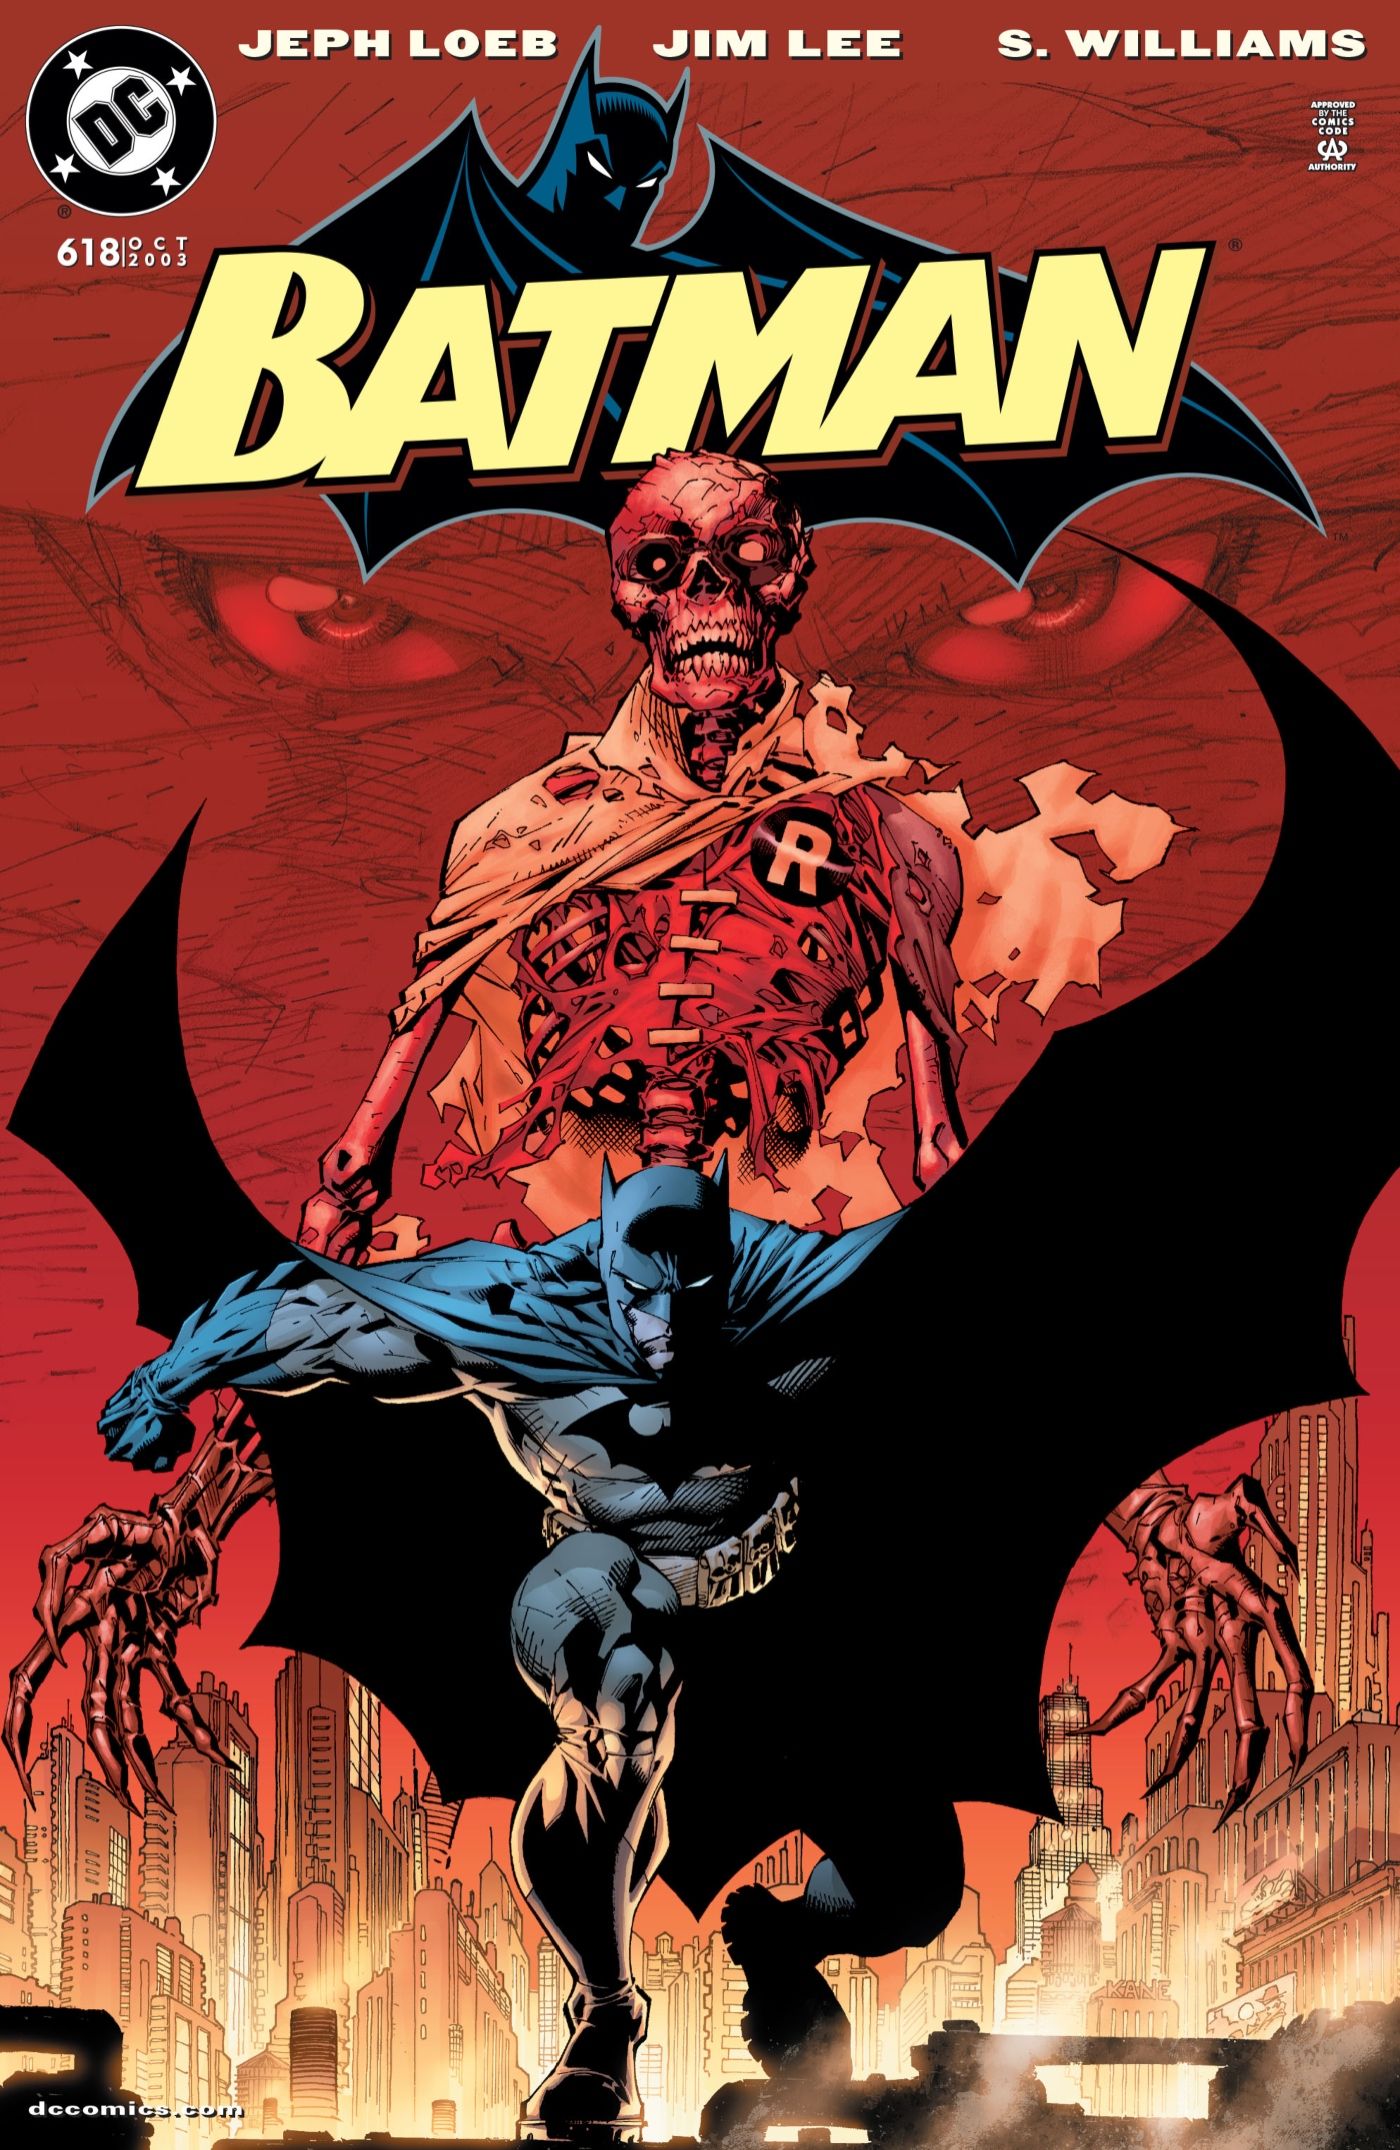 Batman running from a zombified Robin on a comic cover.